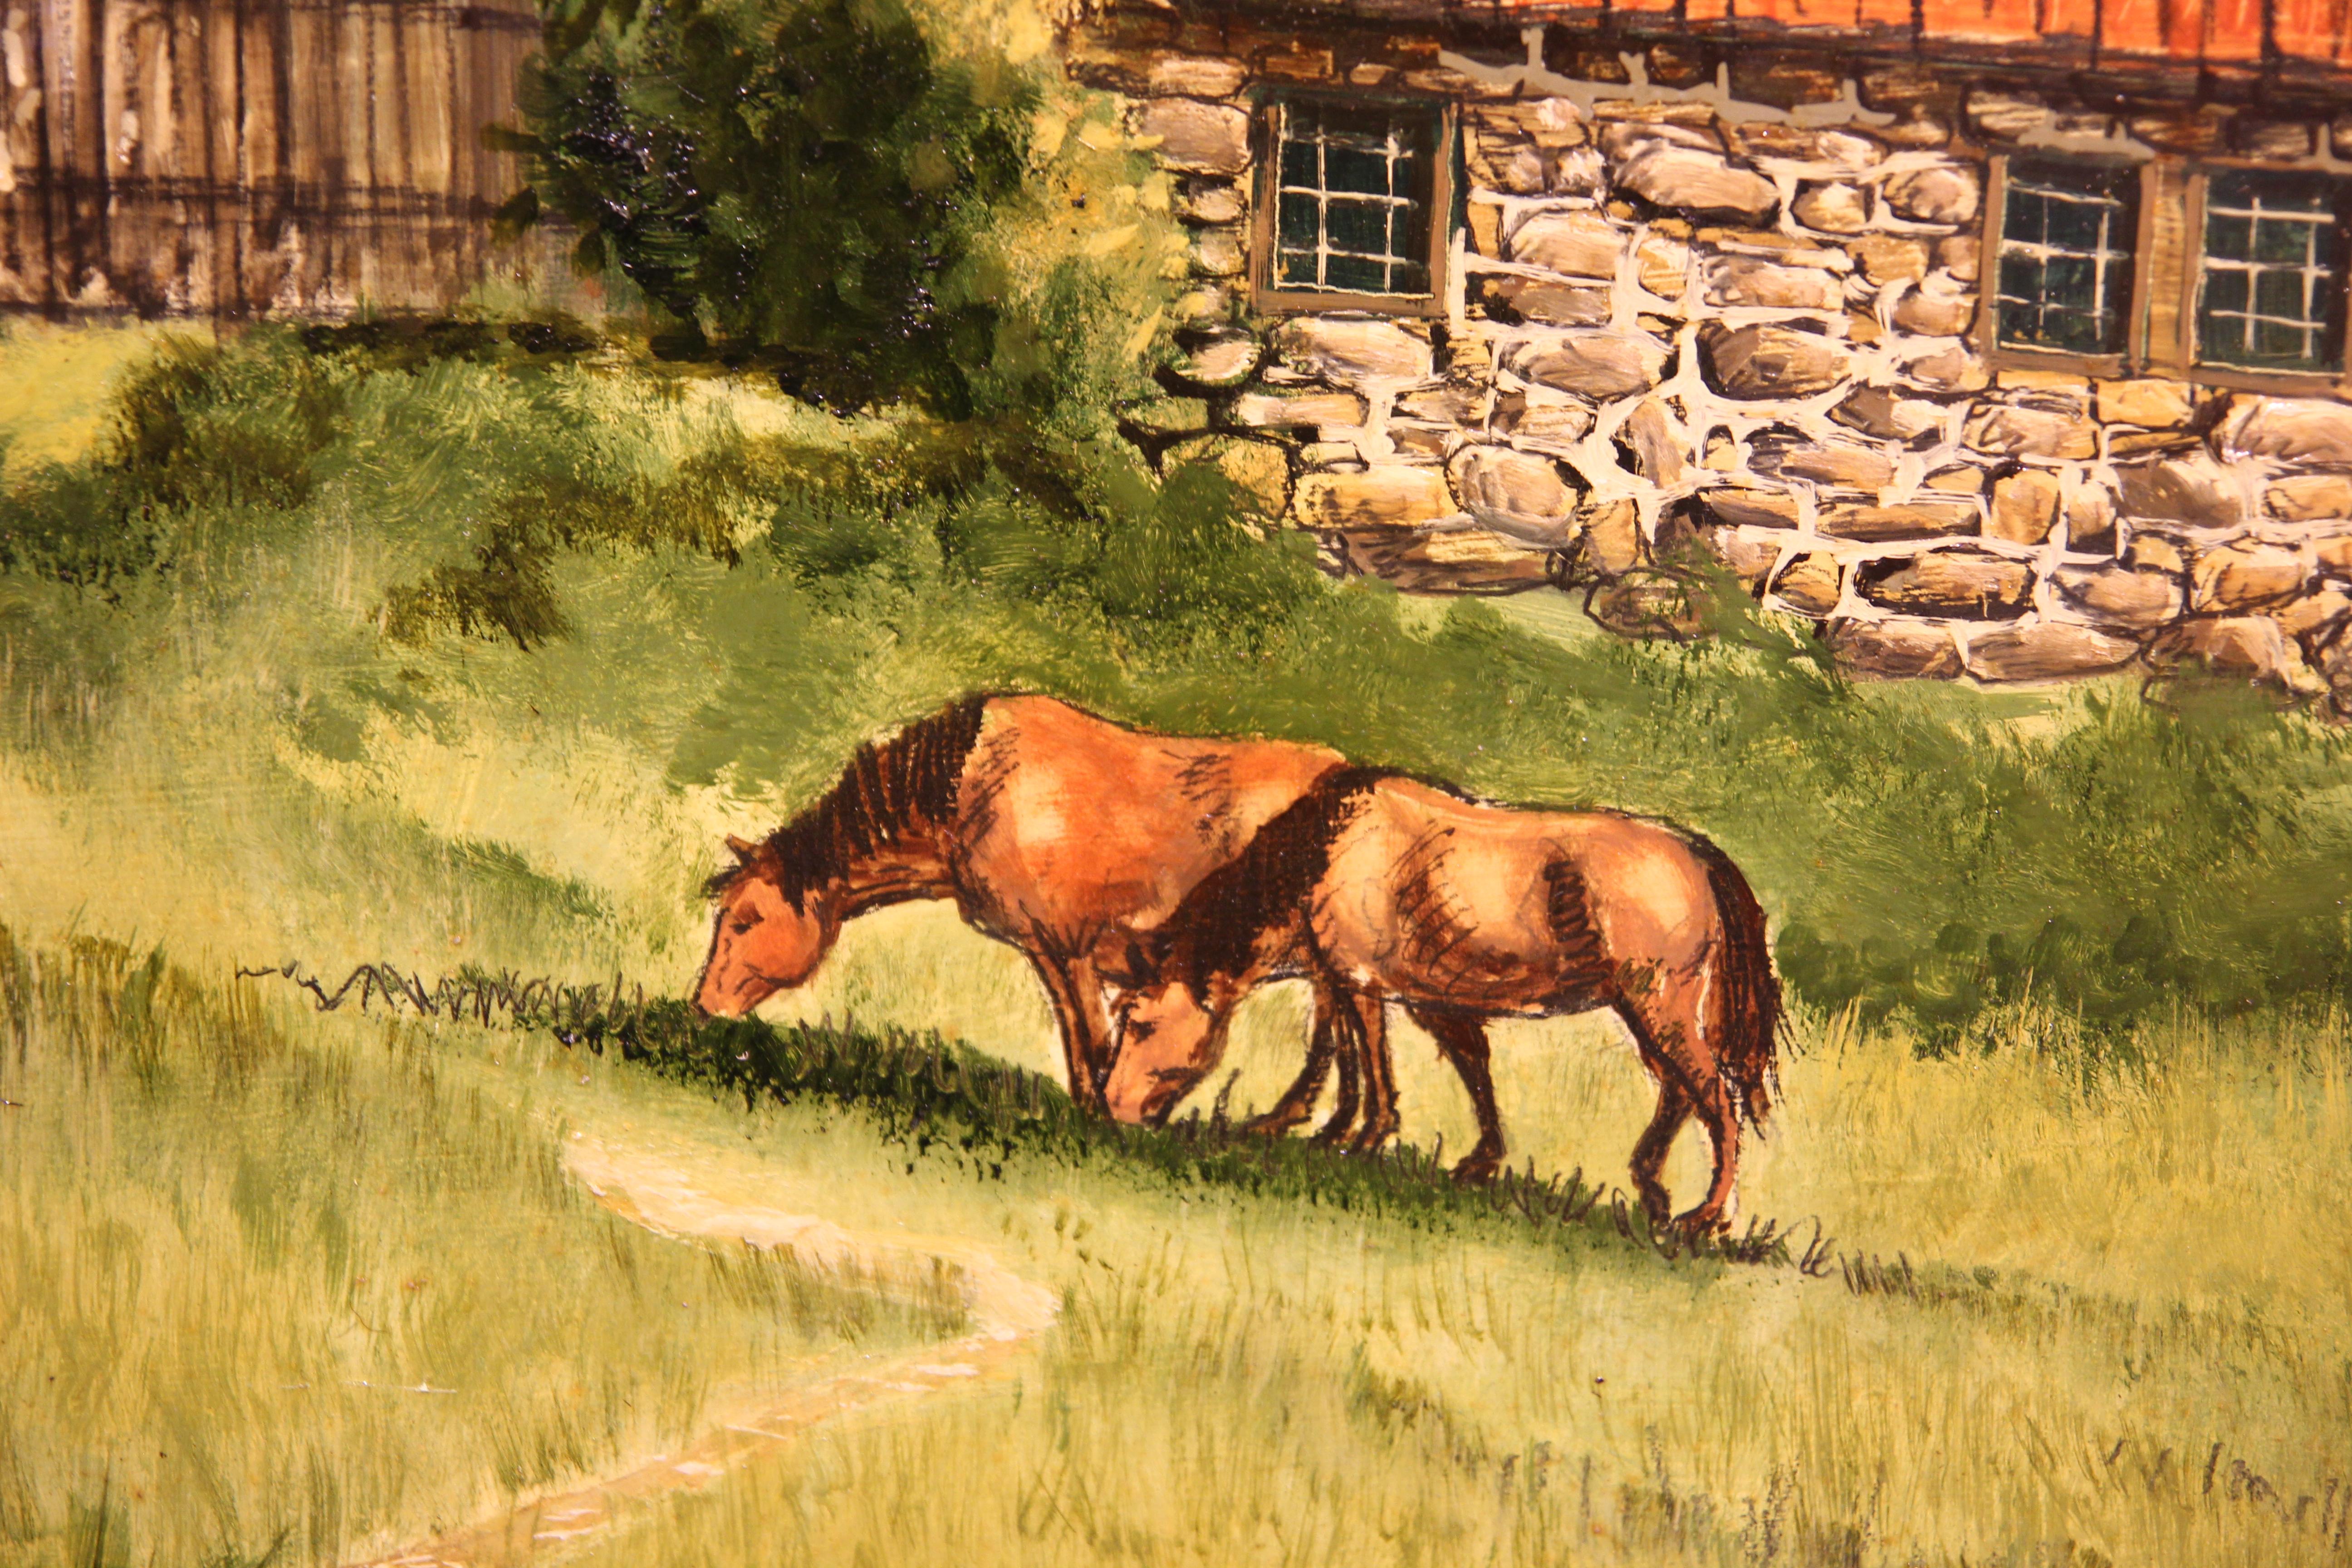 Naturalistic Red Barn and Horses in a Field Pastoral Country Landscape Painting - Brown Animal Painting by W. R. Stevenson